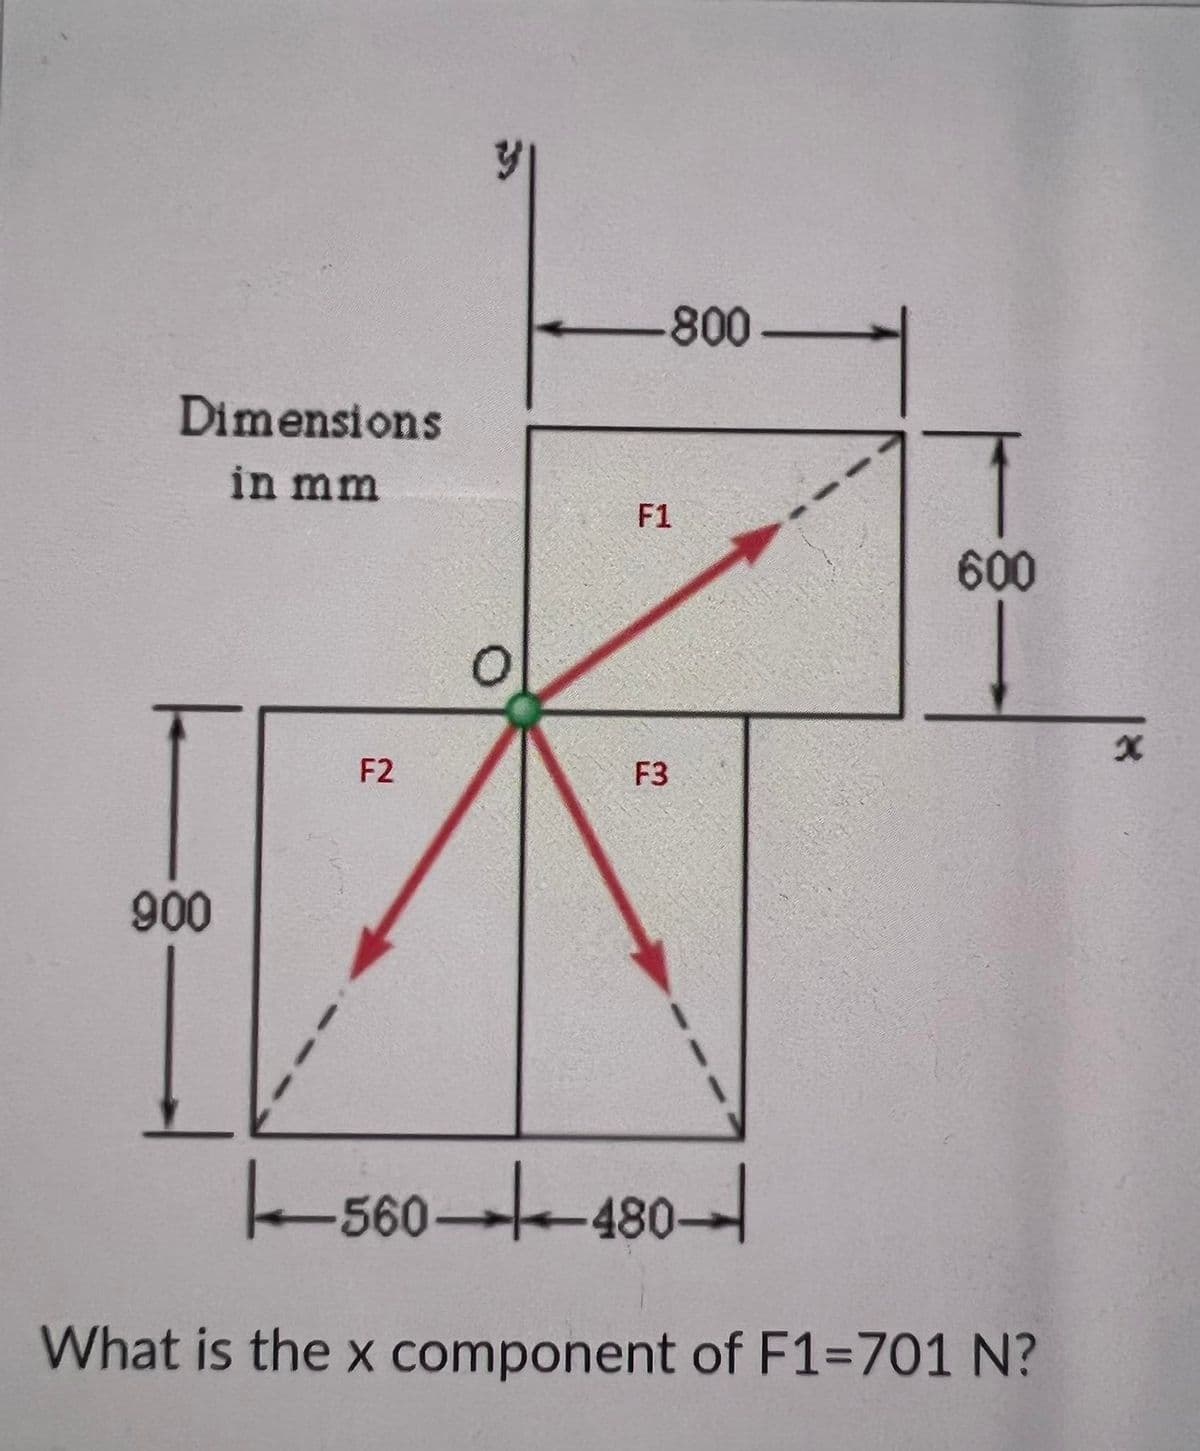 -800-
Dimensions
in mm
F1
600
F2
F3
900
3.
-560-480-
What is the x component of F1=701 N?
